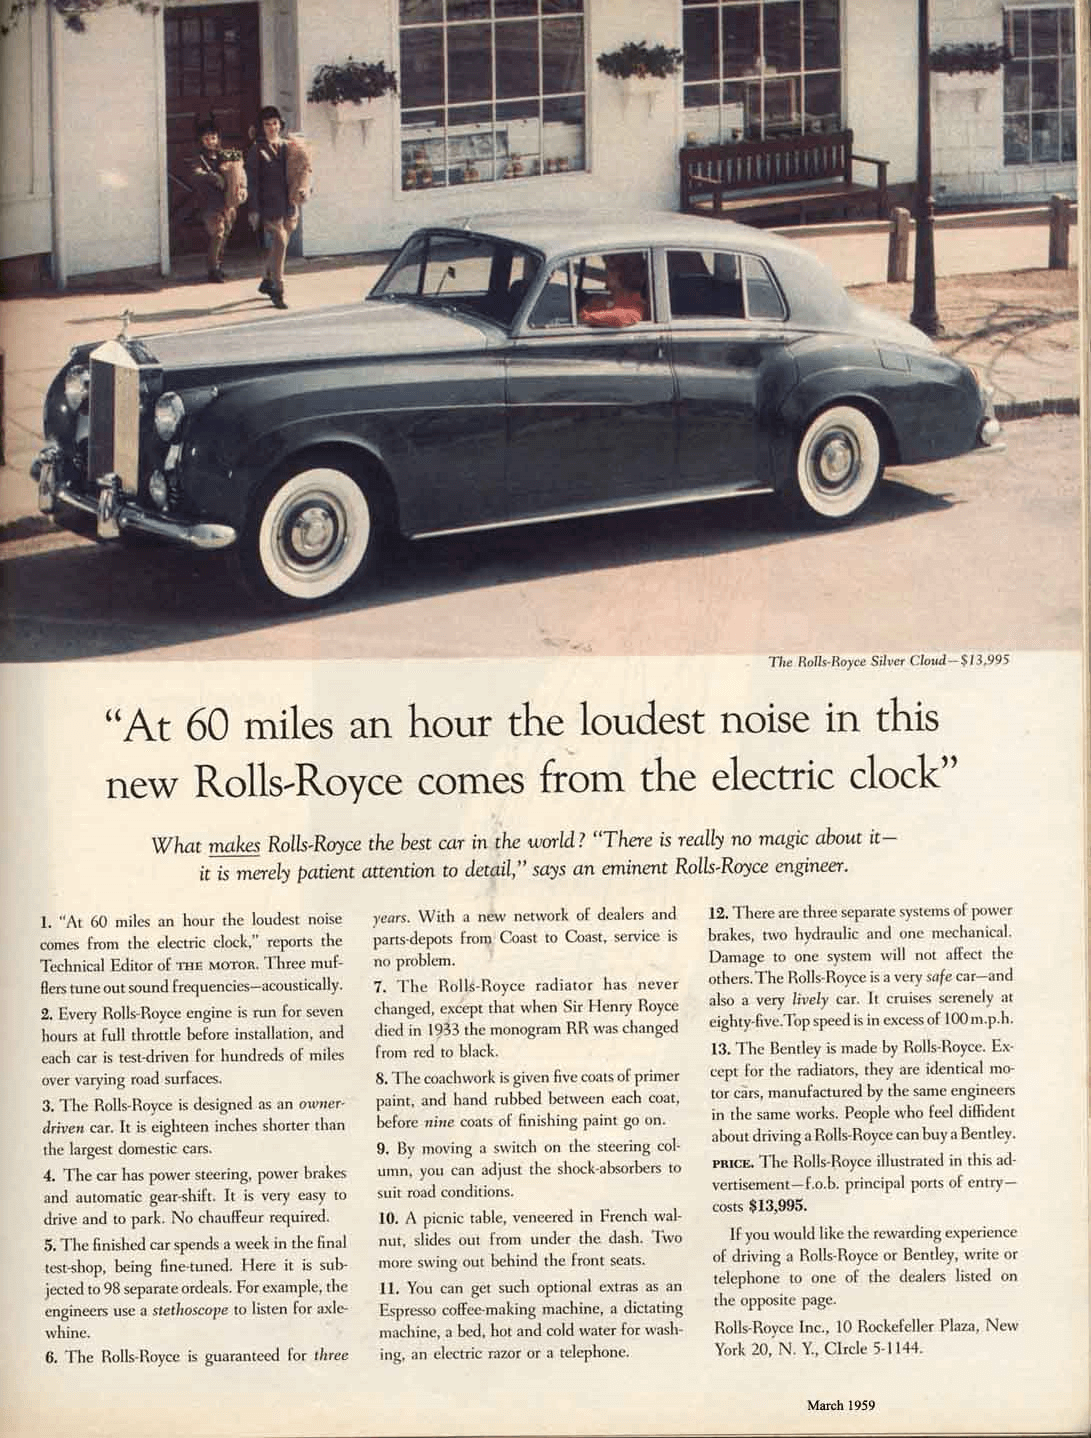 David Ogilvy Rolls-Royce famous advertisement from 1959 stating "At 60 miles an hour the loudest noise in this new Rolls-Royce comes from the electric clock" 